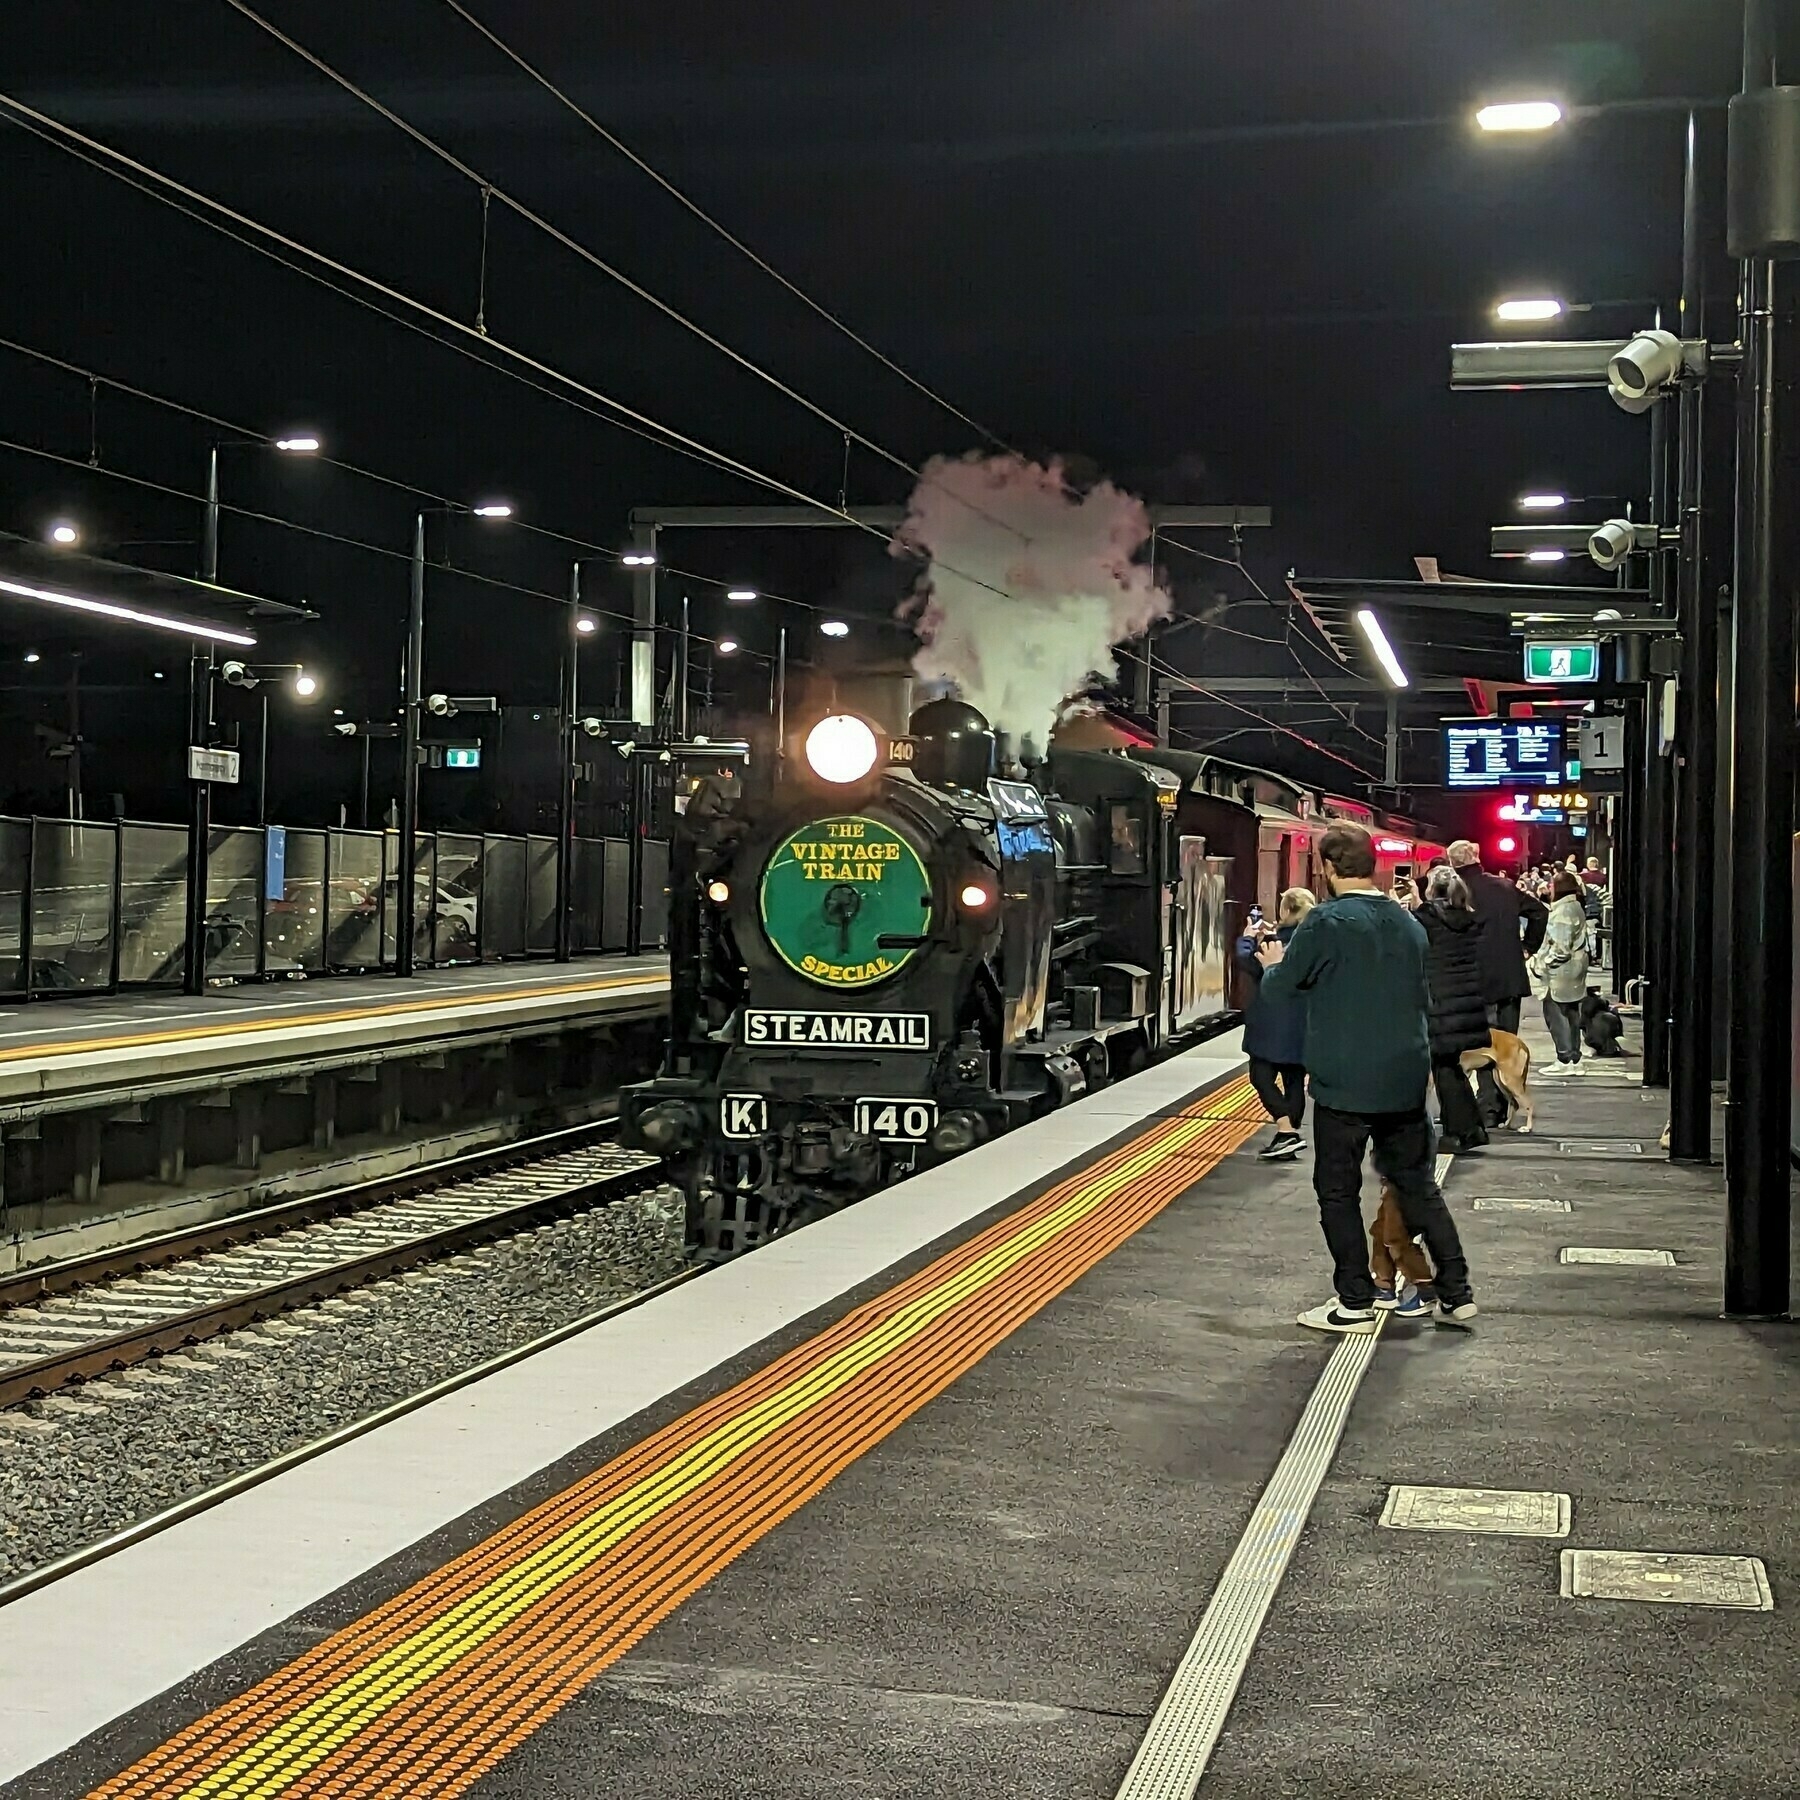 Steam train travelling through station in the evening.